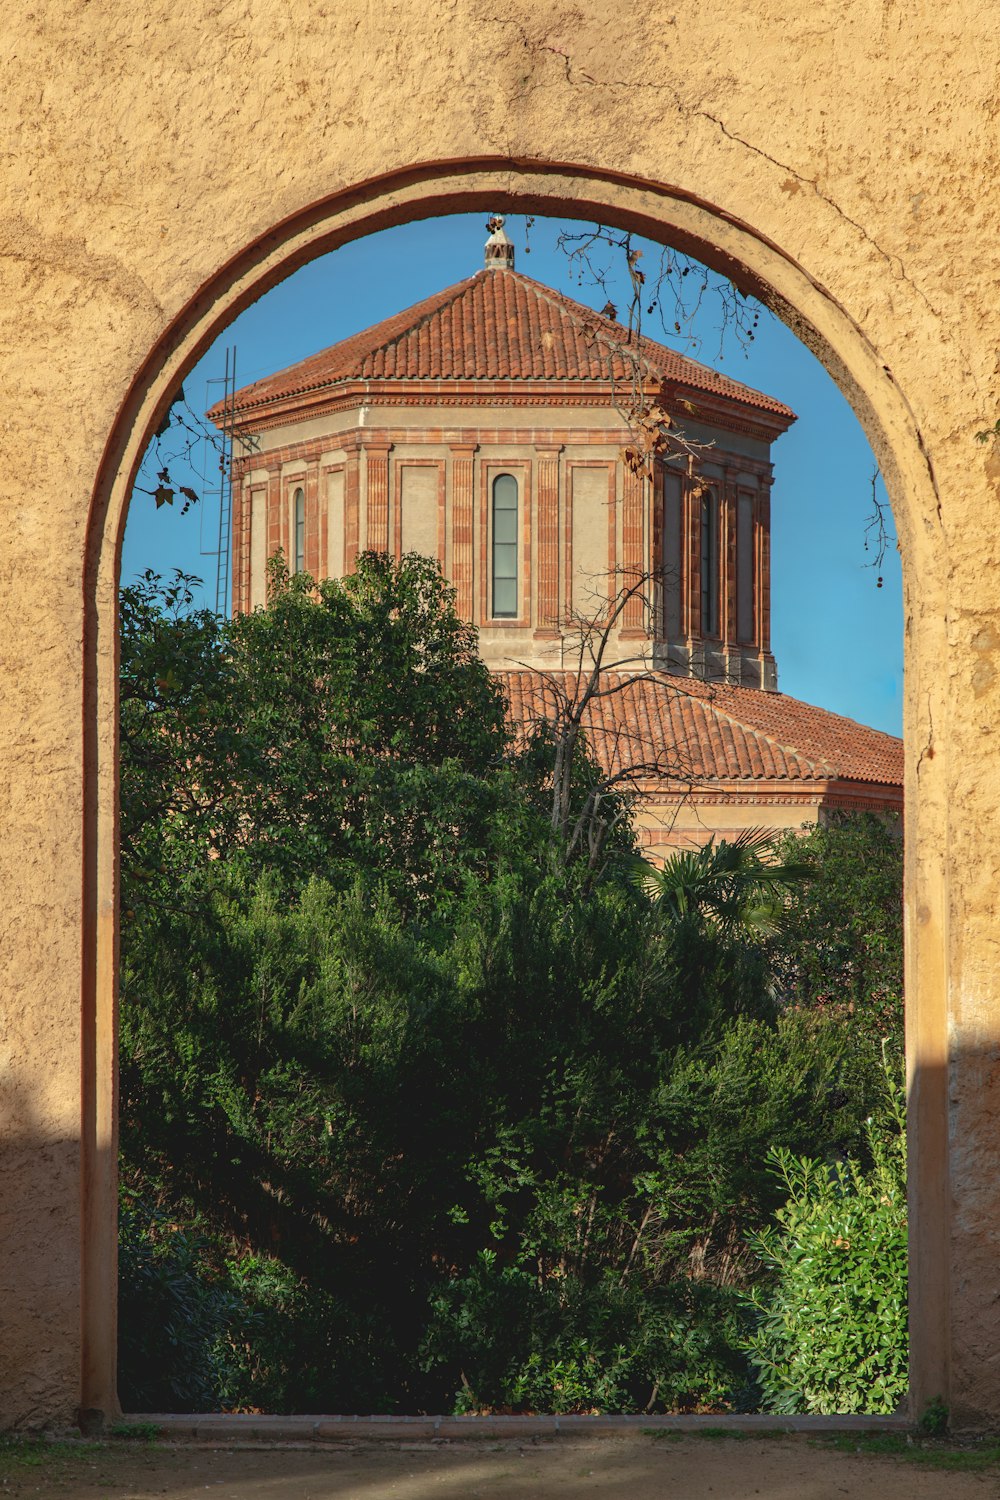 a building with a dome seen through an arch